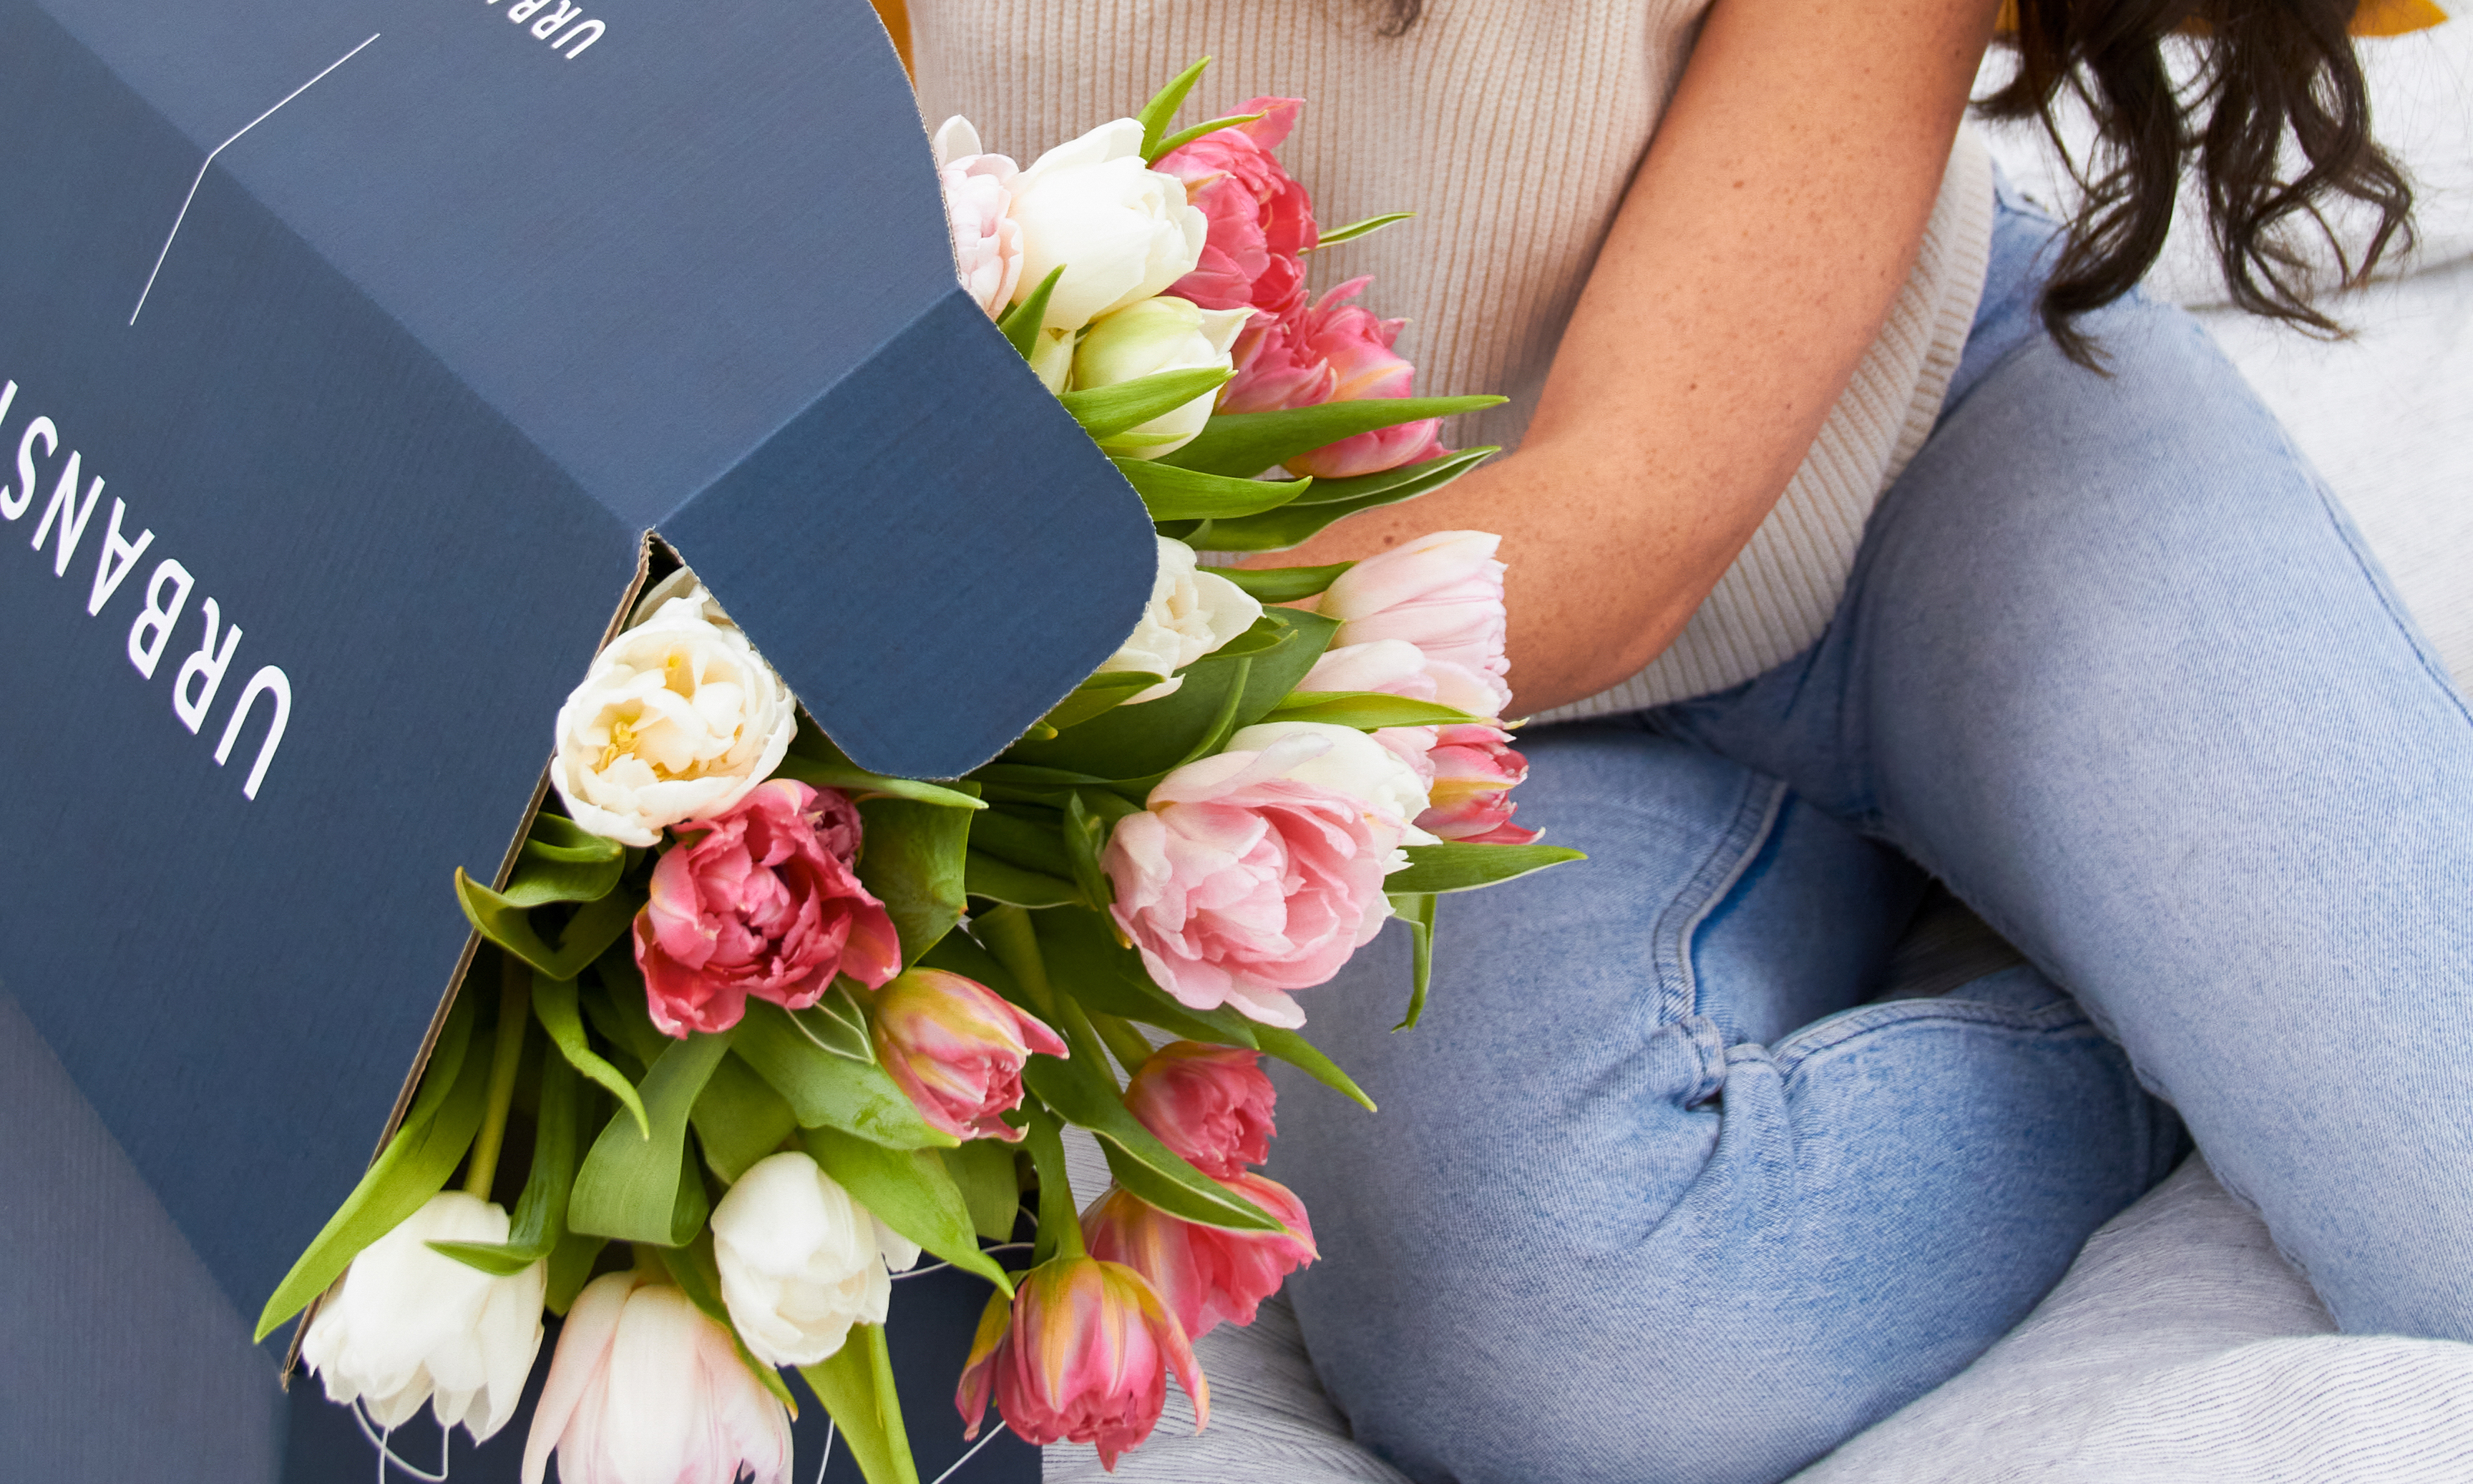 Woman opening a box of tulip flowers for Mother's Day delivery